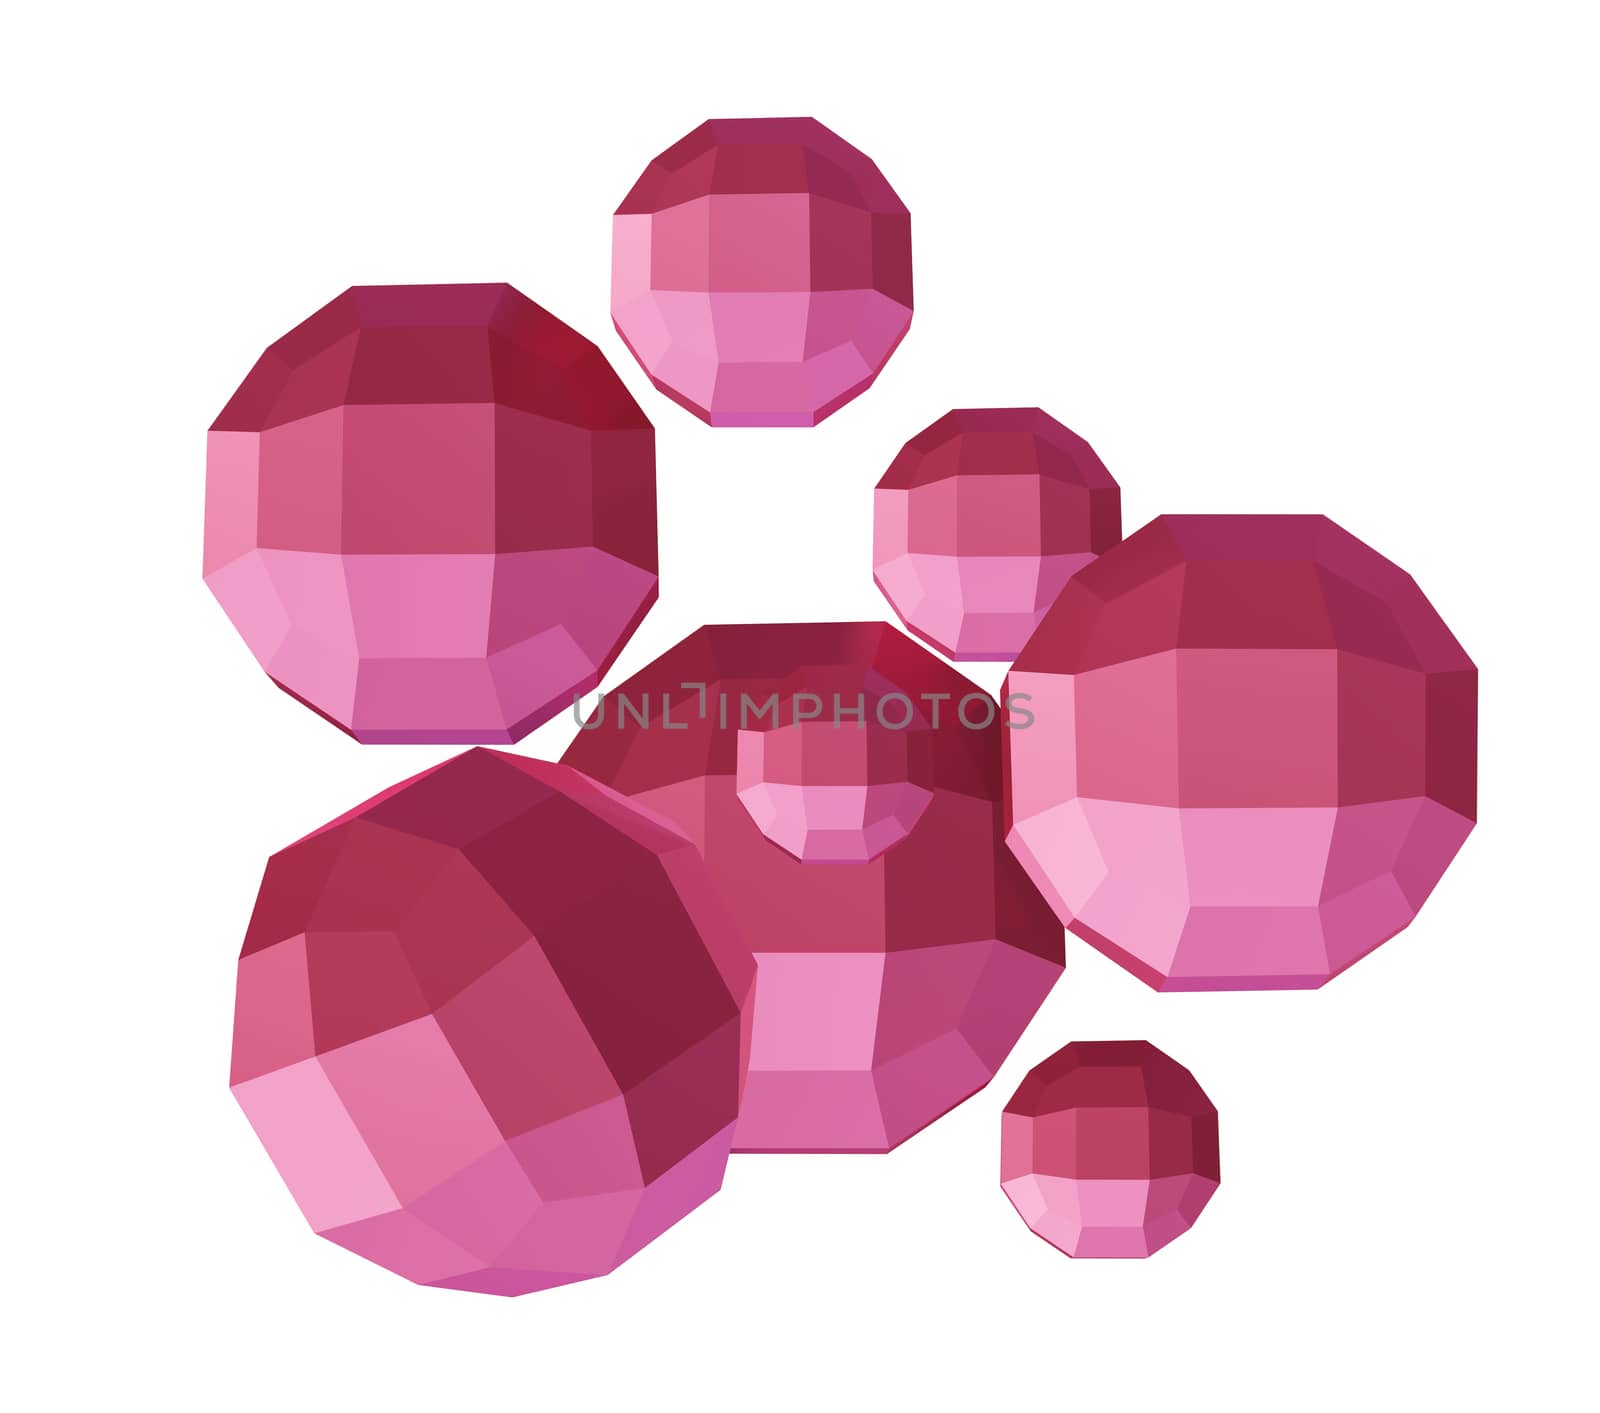 Pink spheres. 3D illustration. Abstract background with 3d geometric shapes